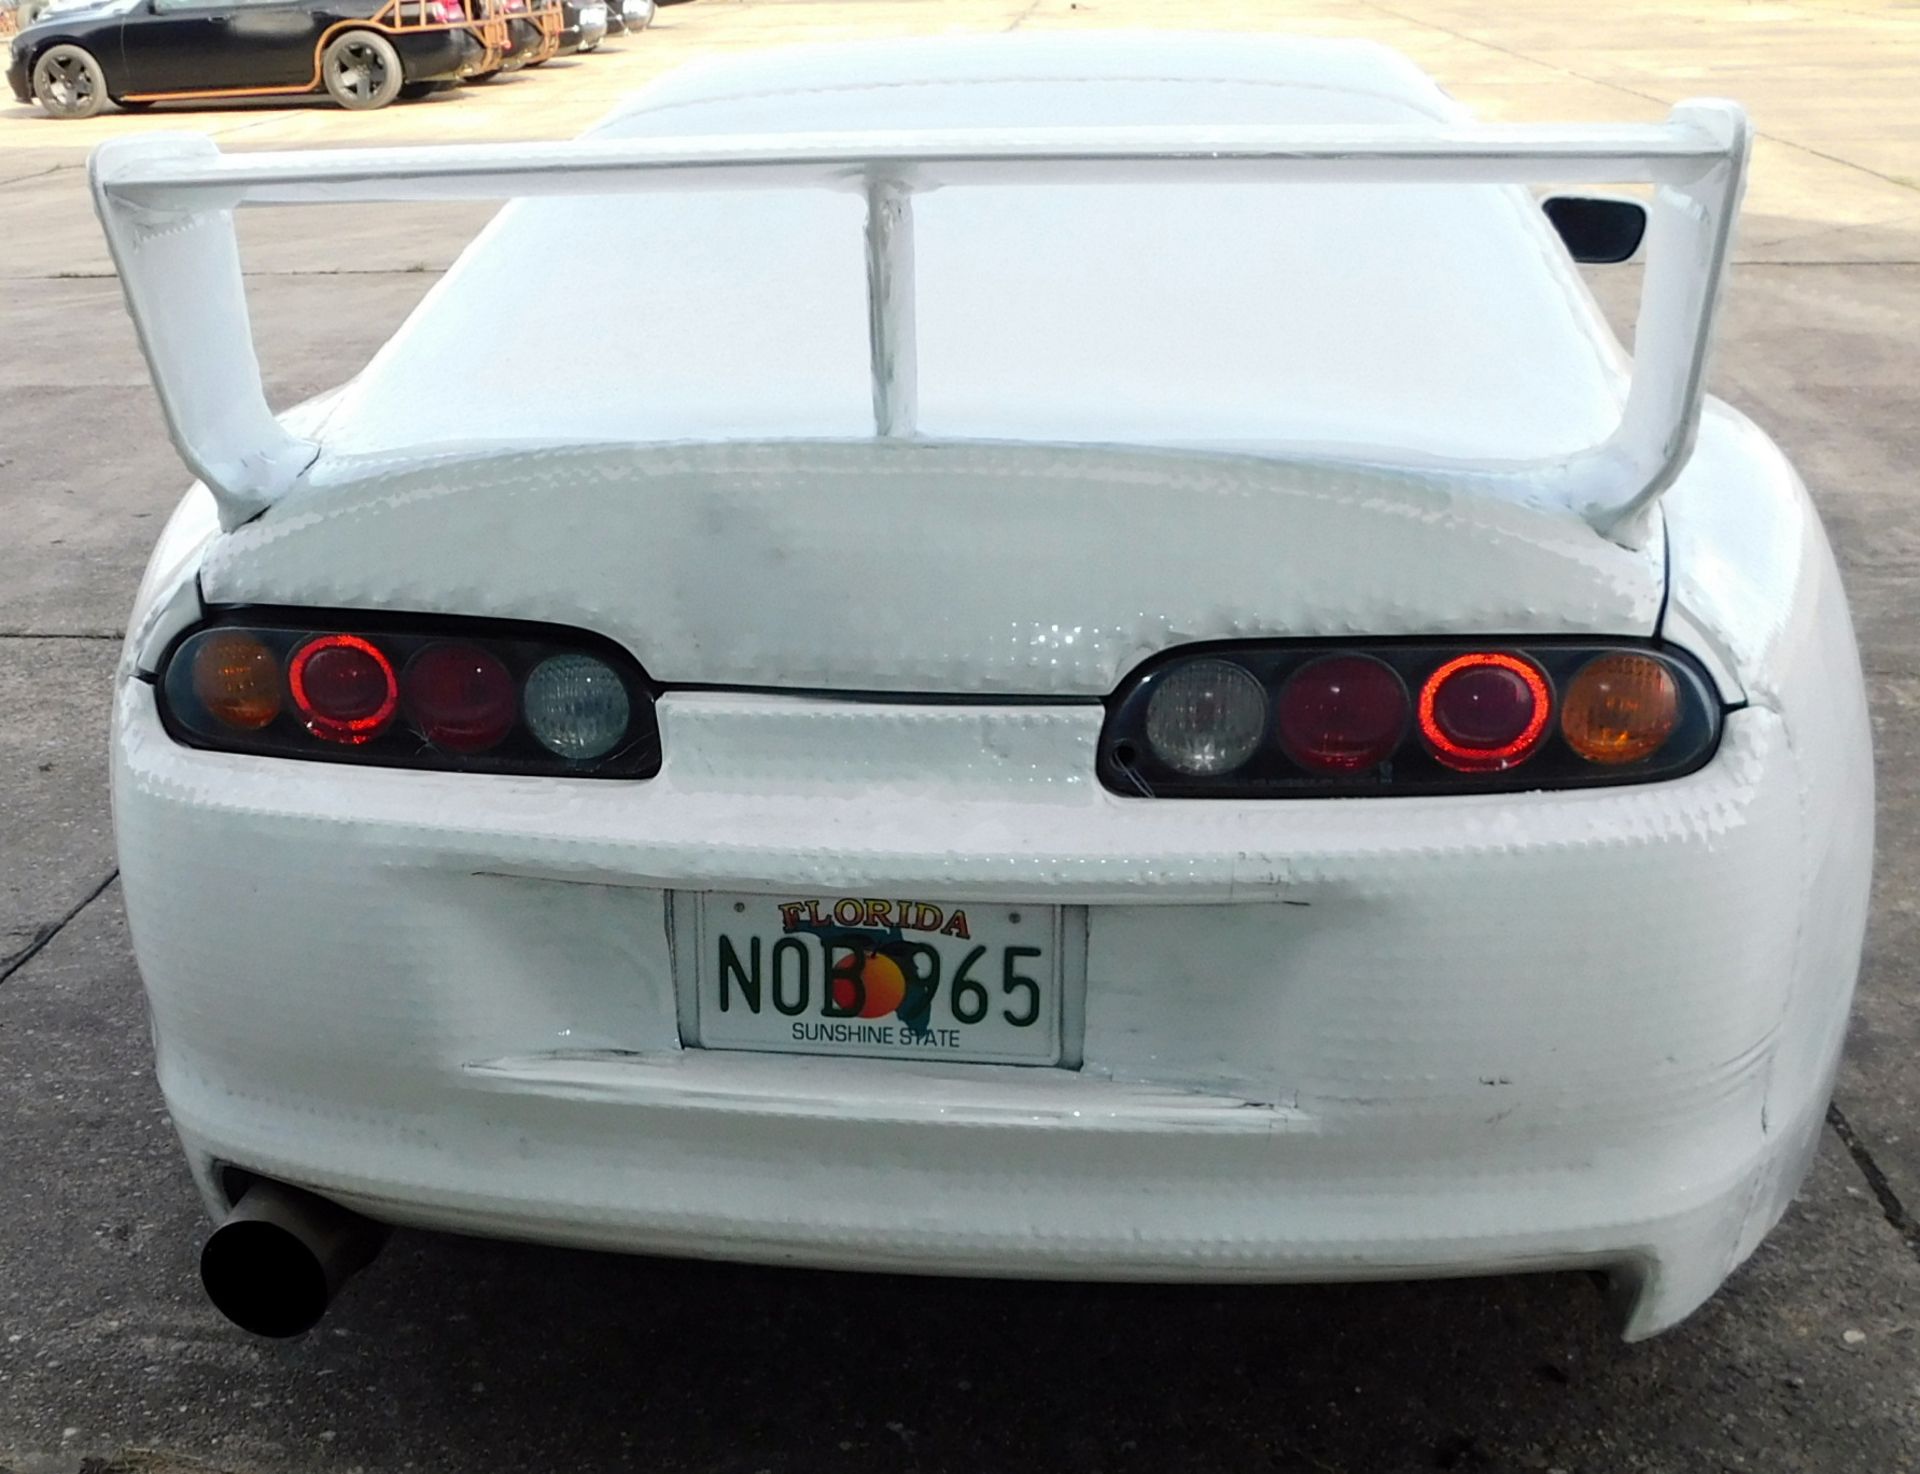 Toyota Supra RHD 2 Door Coupe, LED Lighting System Body Coverage, Ford Duratec 2.5 4 Cylinder - Image 8 of 13